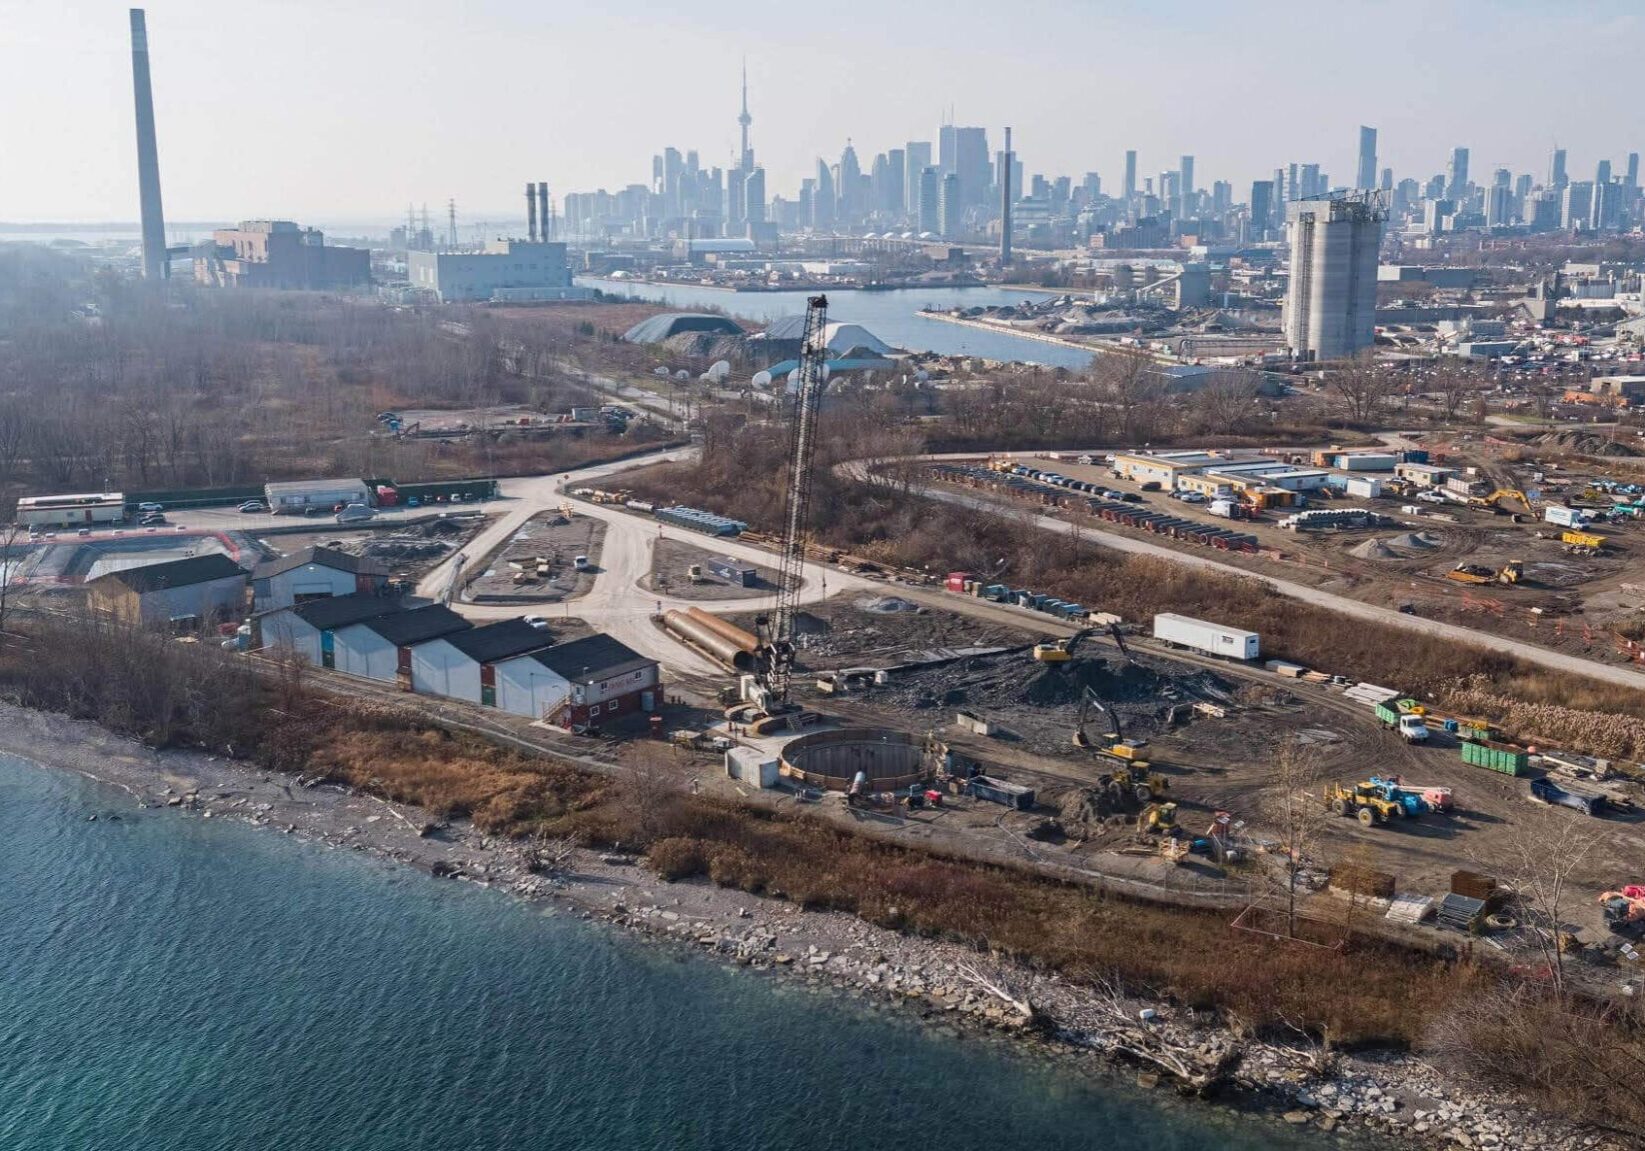 Overhead shot of job site at Ashbridges Bay. Lake in foreground, cityscape in background.